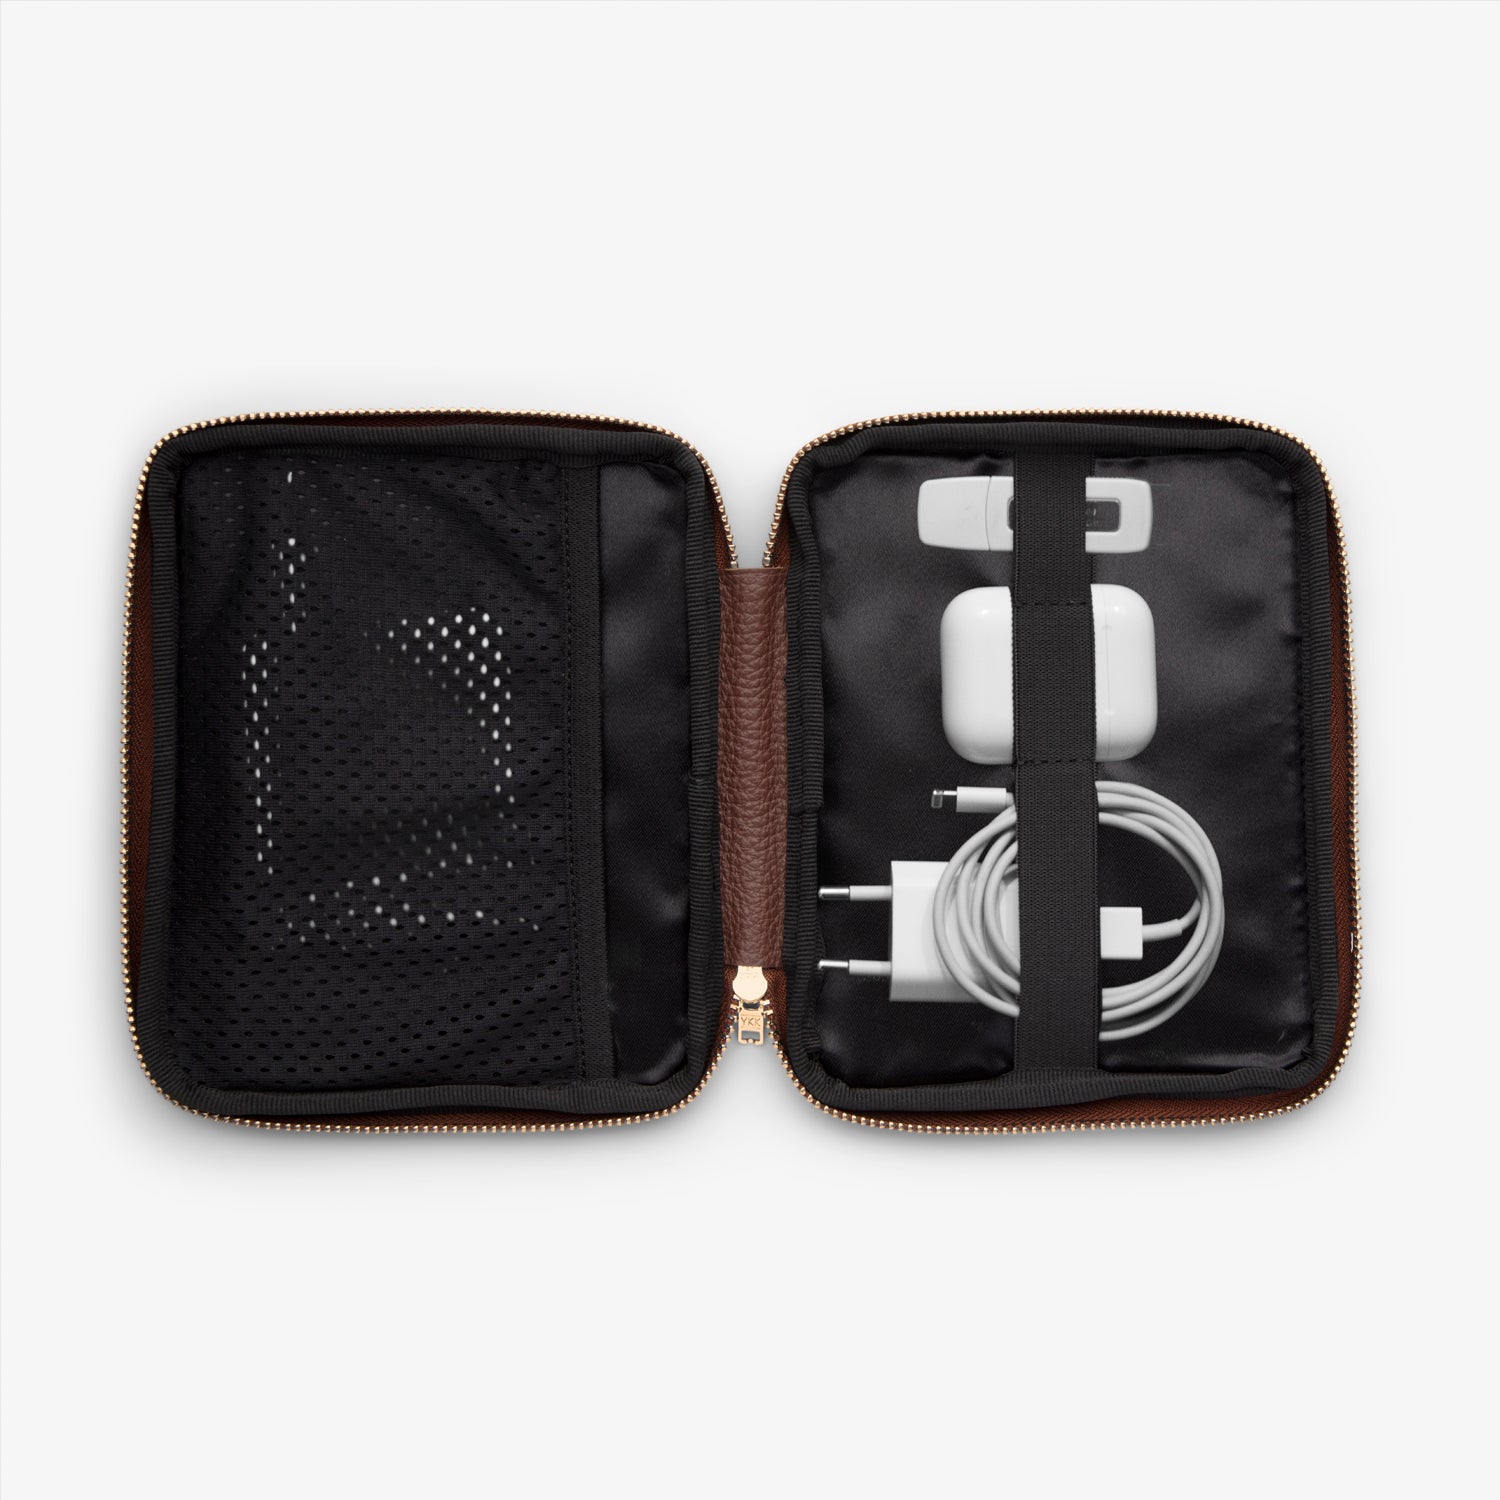 Shows the inside of a cable pocket displaying AirPods, phone charger, and USB stick, all neatly arranged and organized for easy access while on the go.